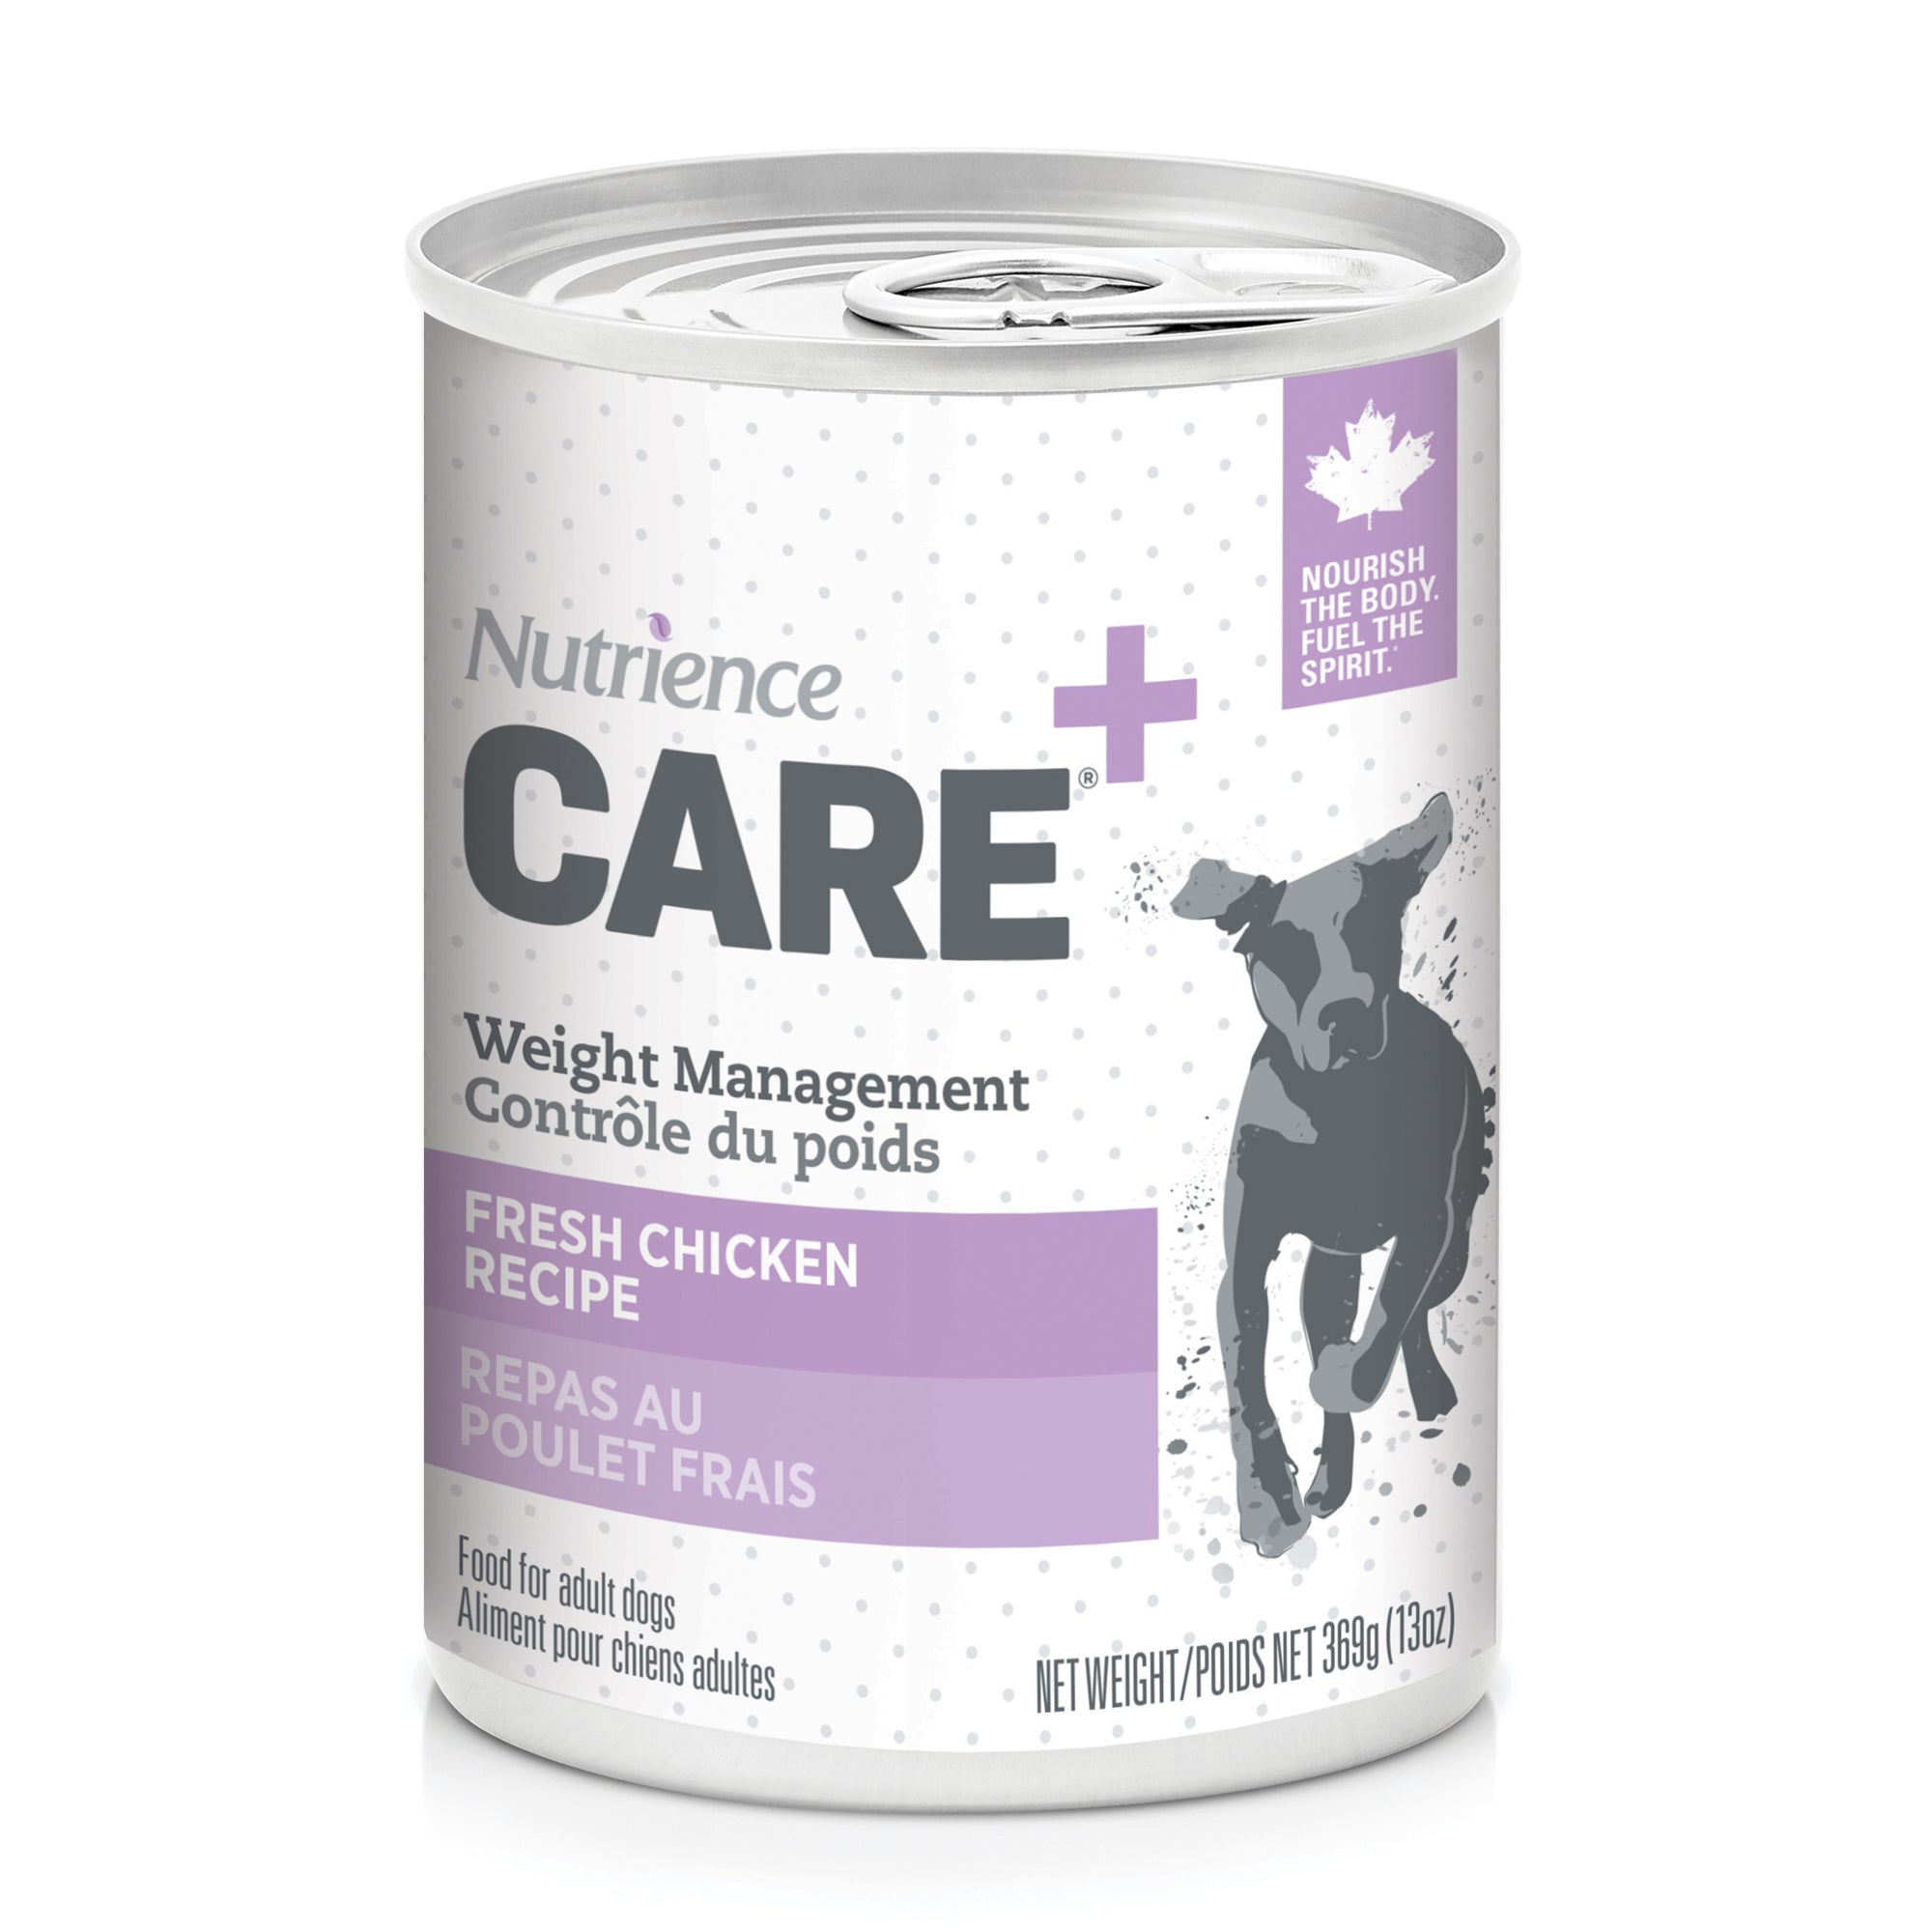 Nutrience Care Weight Management Pâté for Dogs - Fresh Chicken Recipe - 369 g (13 oz)